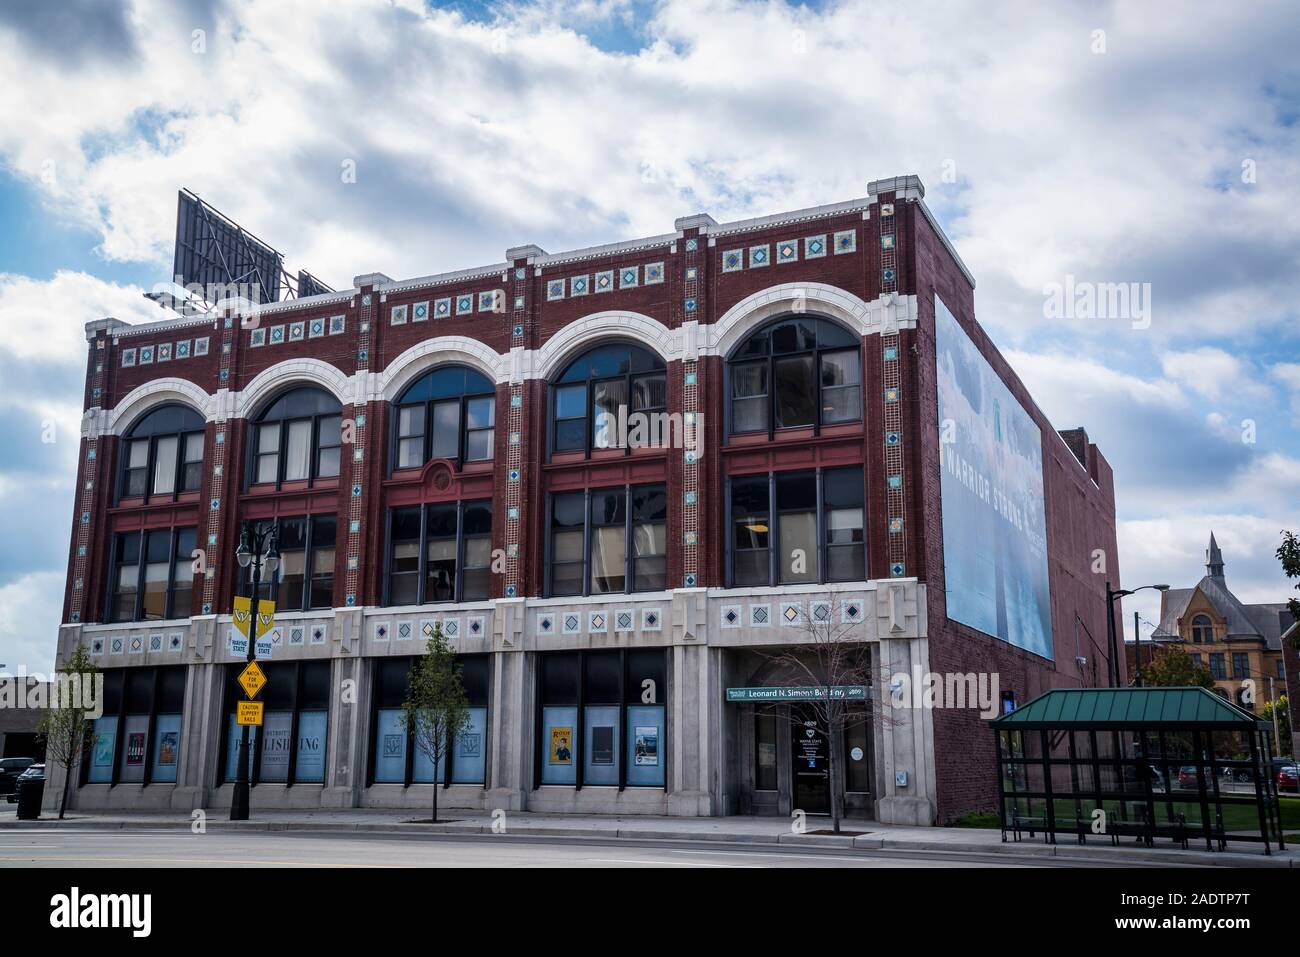 Leonard Simons Building, Constructed in 1915 and owned by Wayne State University. Woodward Avenue, Detroit's Main Street, Detroit, Michigan, USA Stock Photo